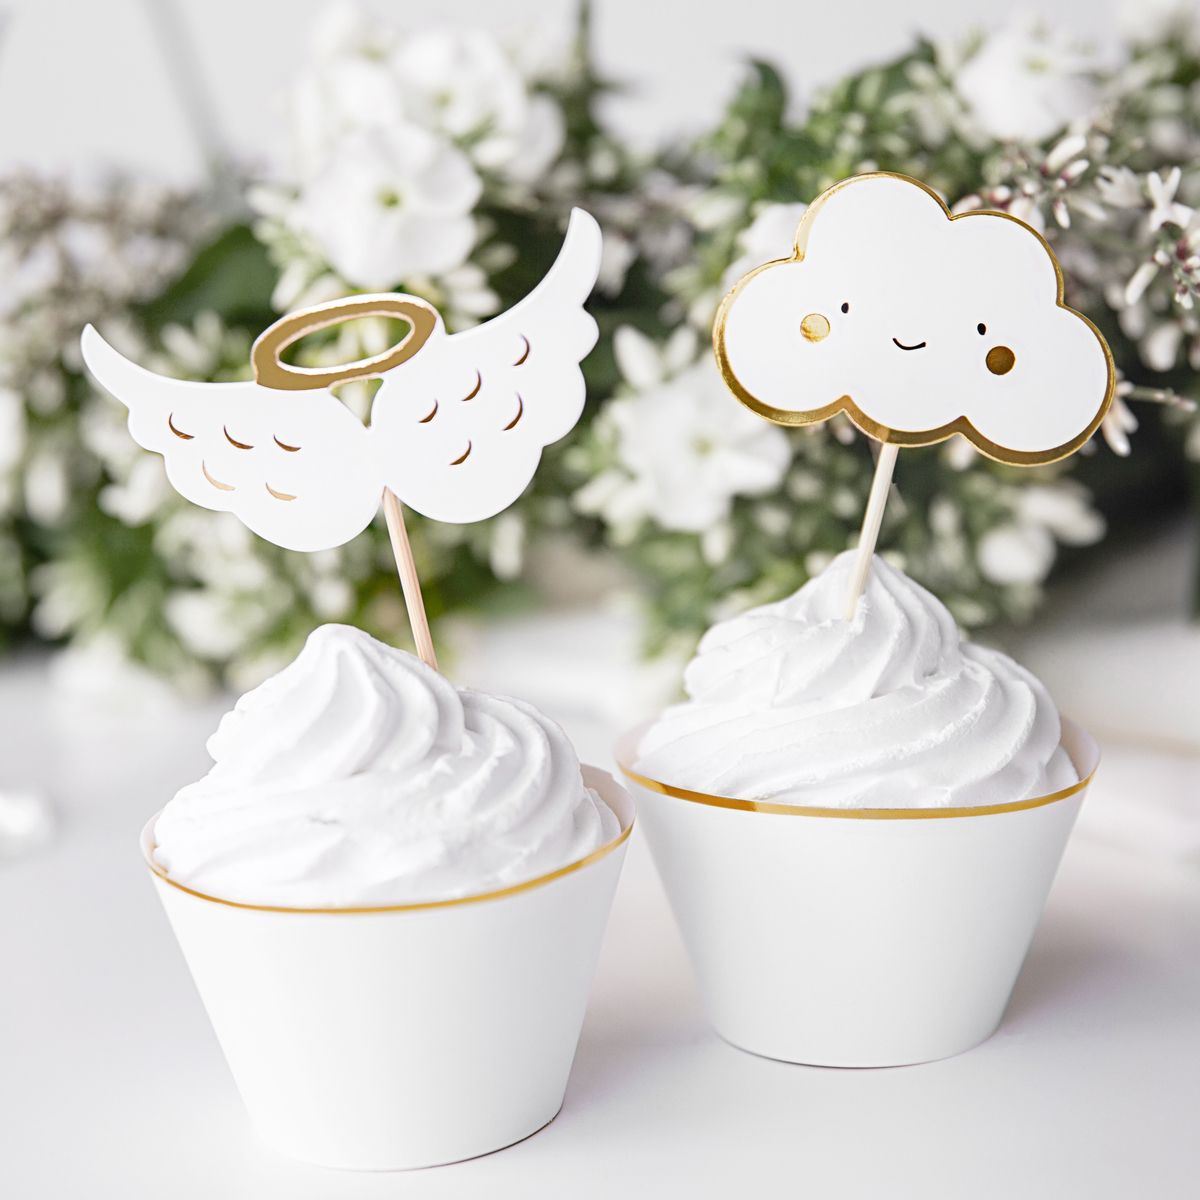 Cupcake decorations - First Holy Communion